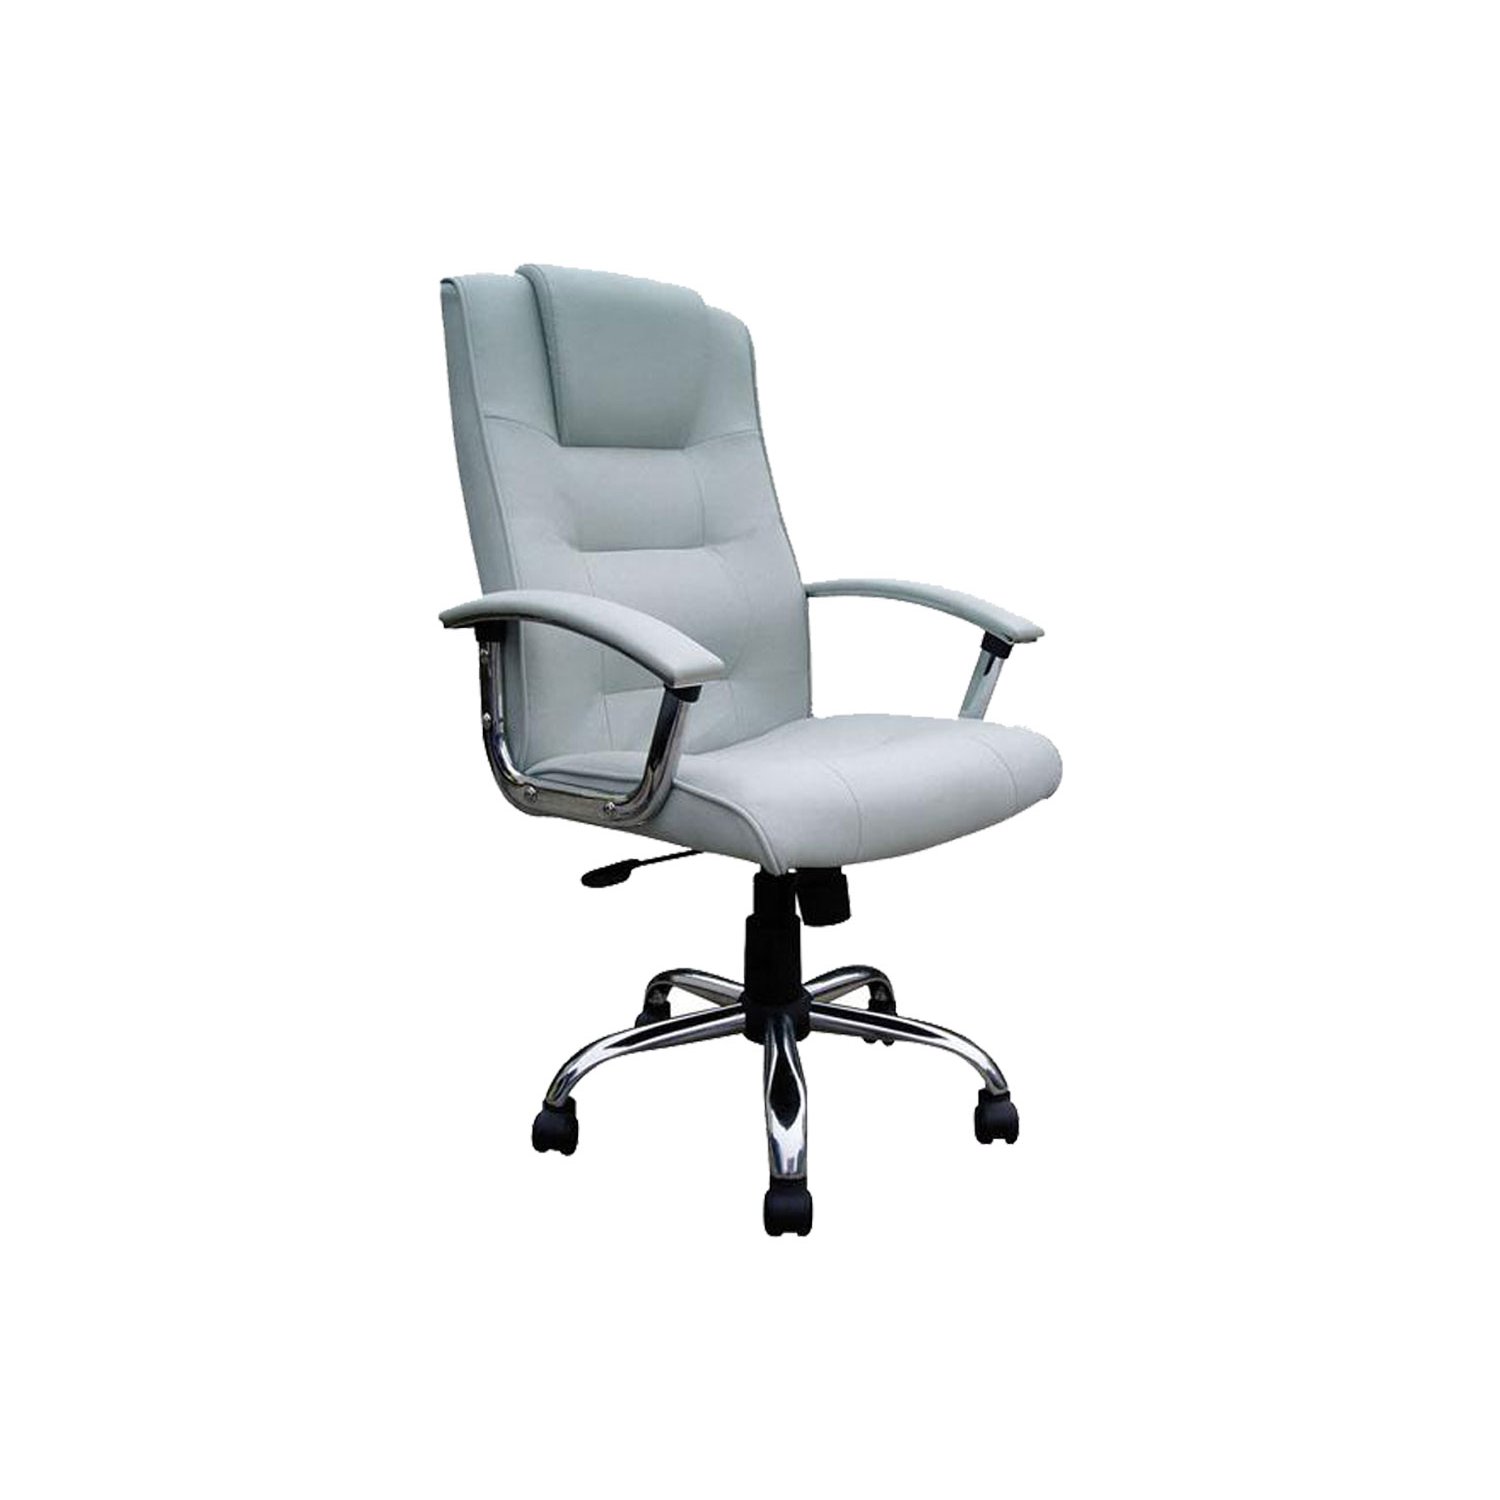 Skye High Back Silver Leather Faced Executive Chair